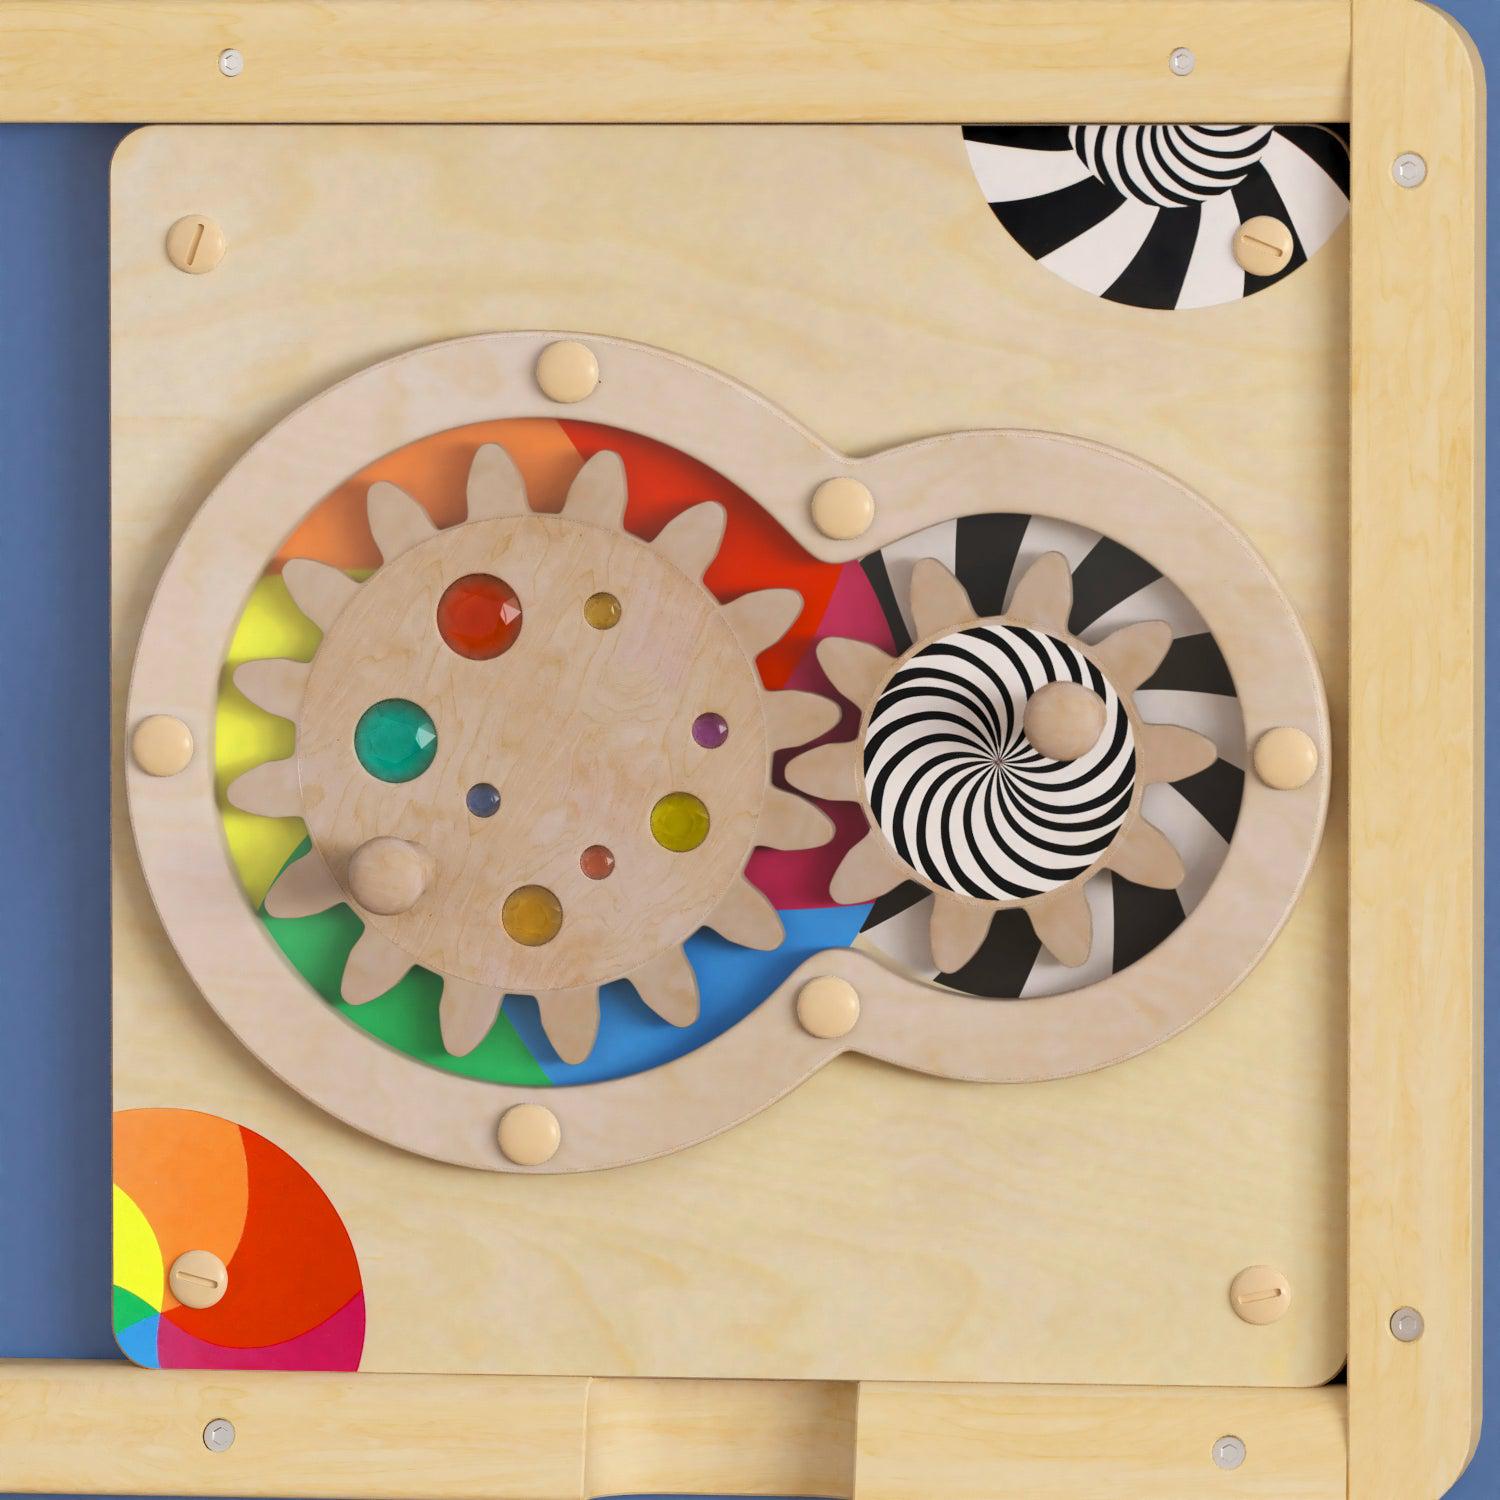 Bright Beginnings Commercial Grade STEAM Wall Activity Board with Natural Finish and Multicolor Accents, Turning Gears